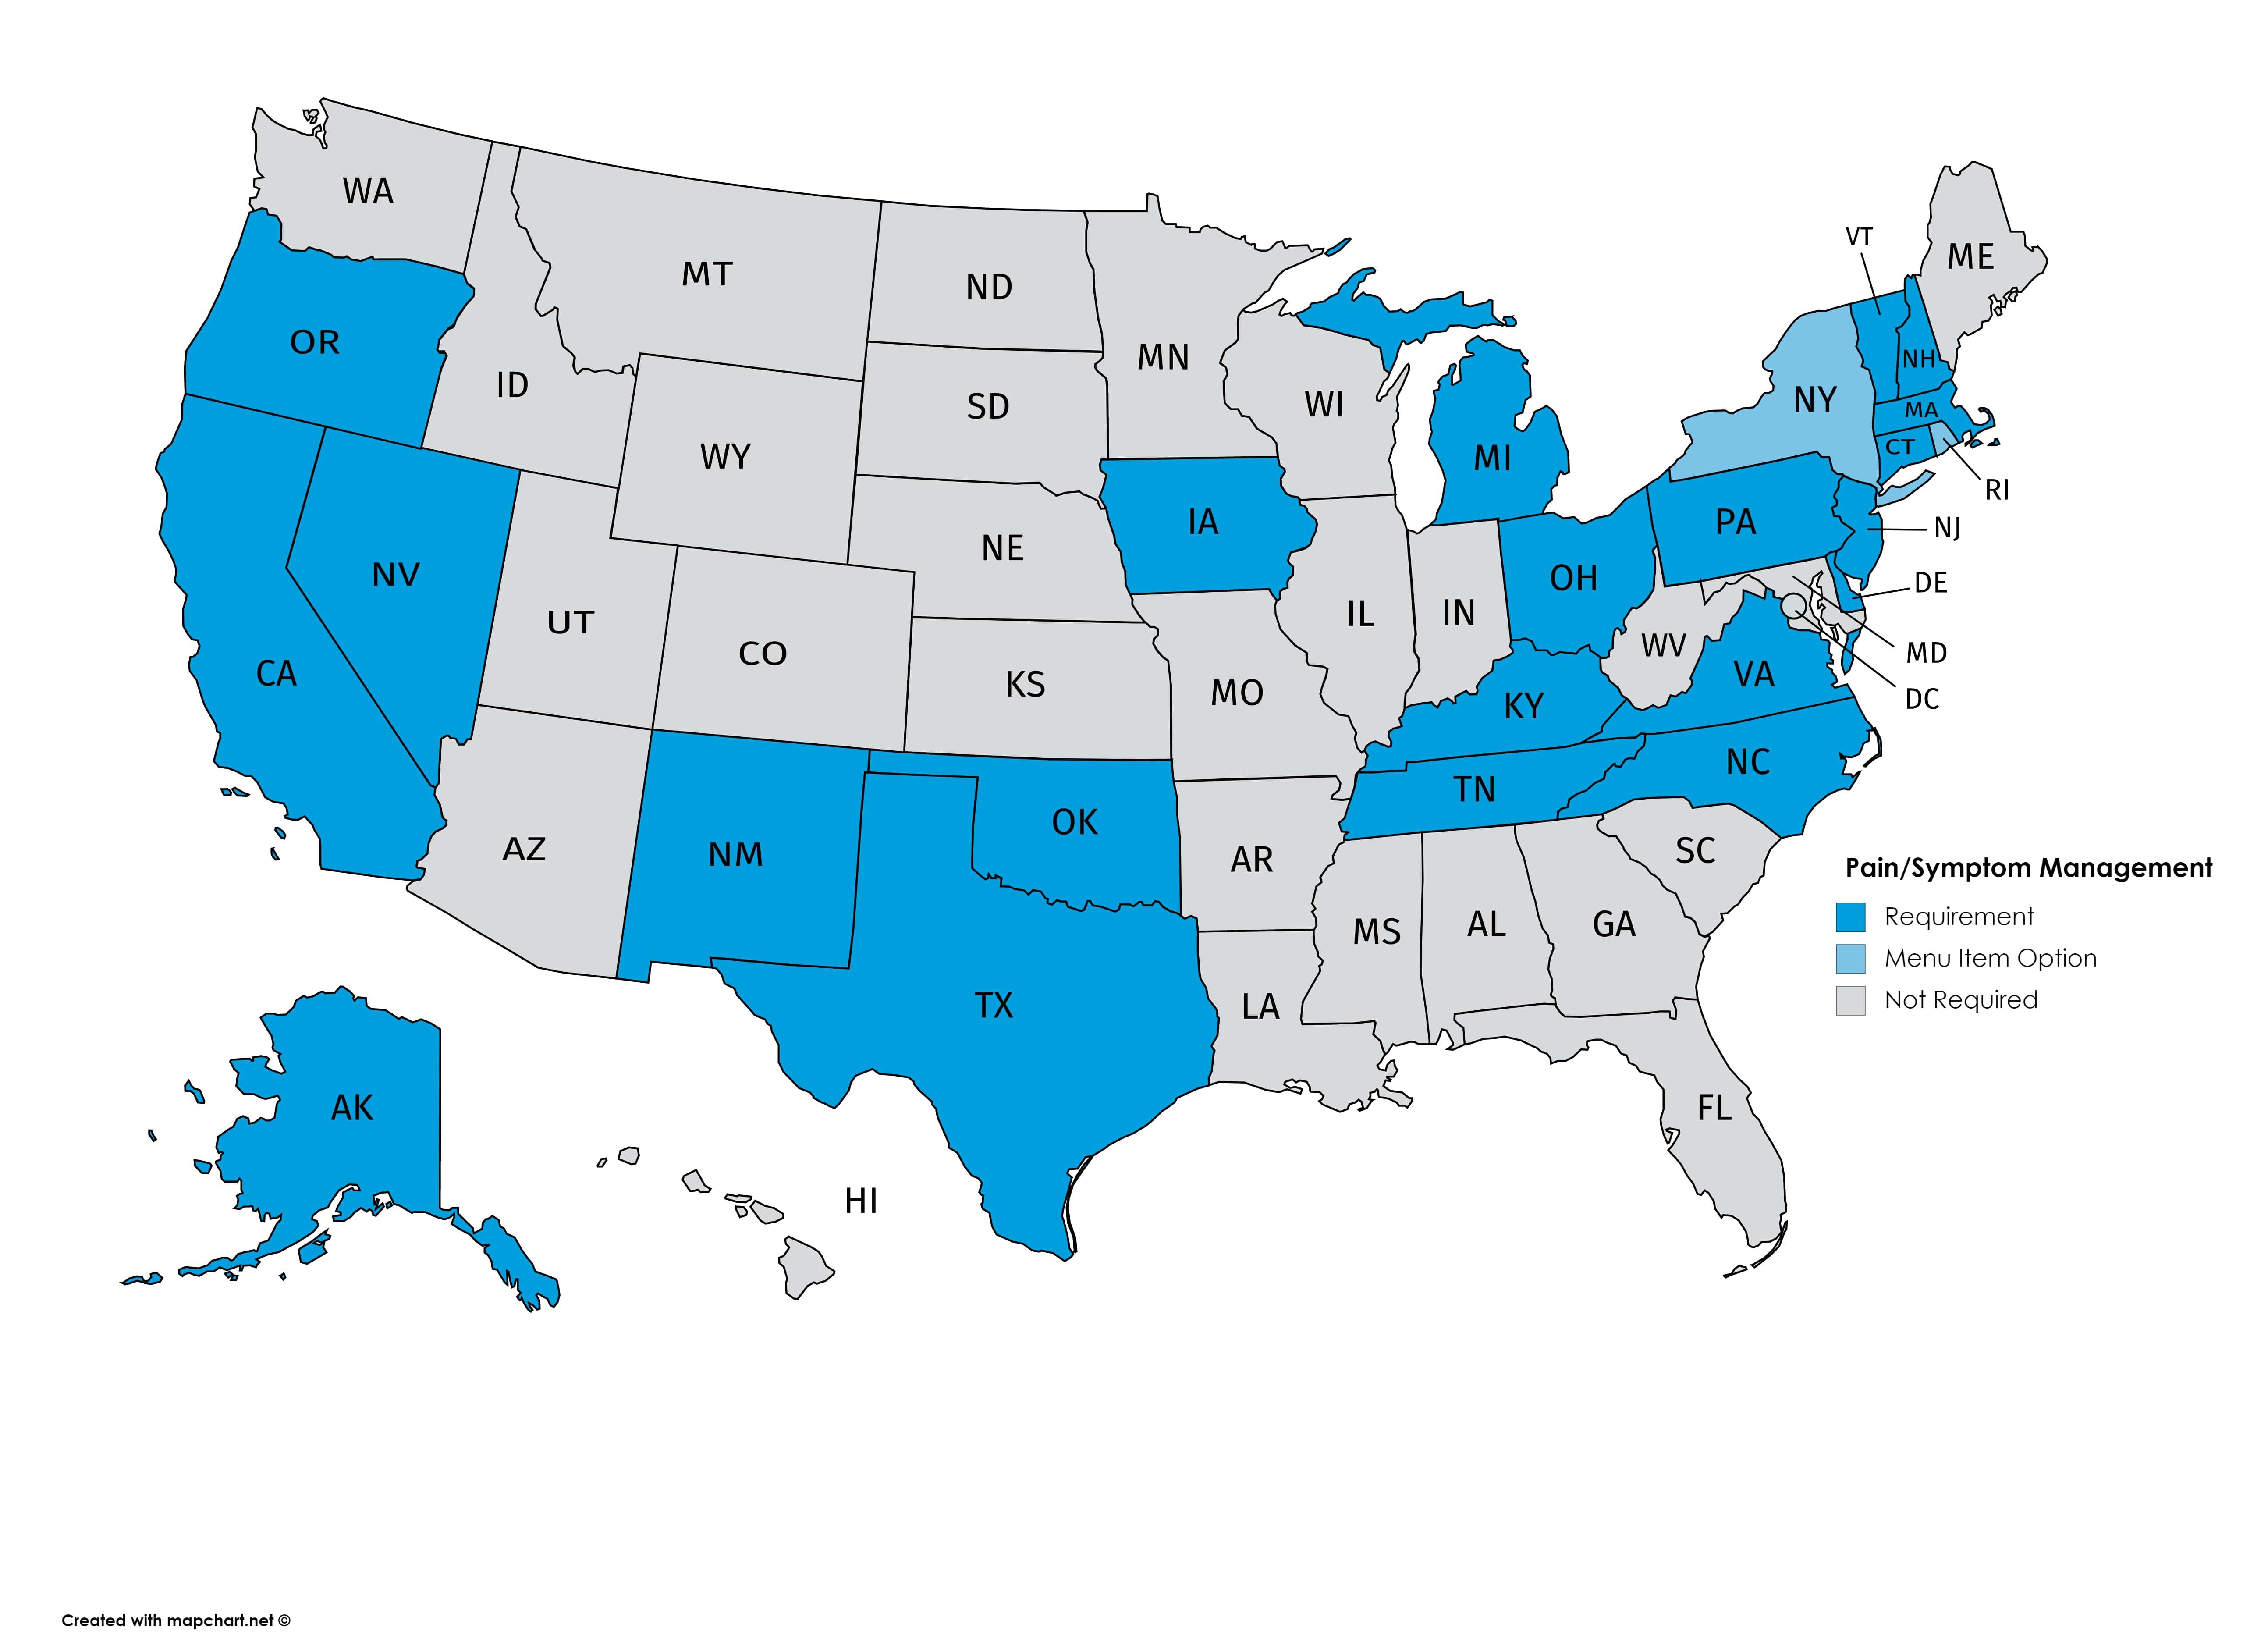 US Map Depicting Continuing Medical Education (CME) on Pain and Symptom Management, 2020